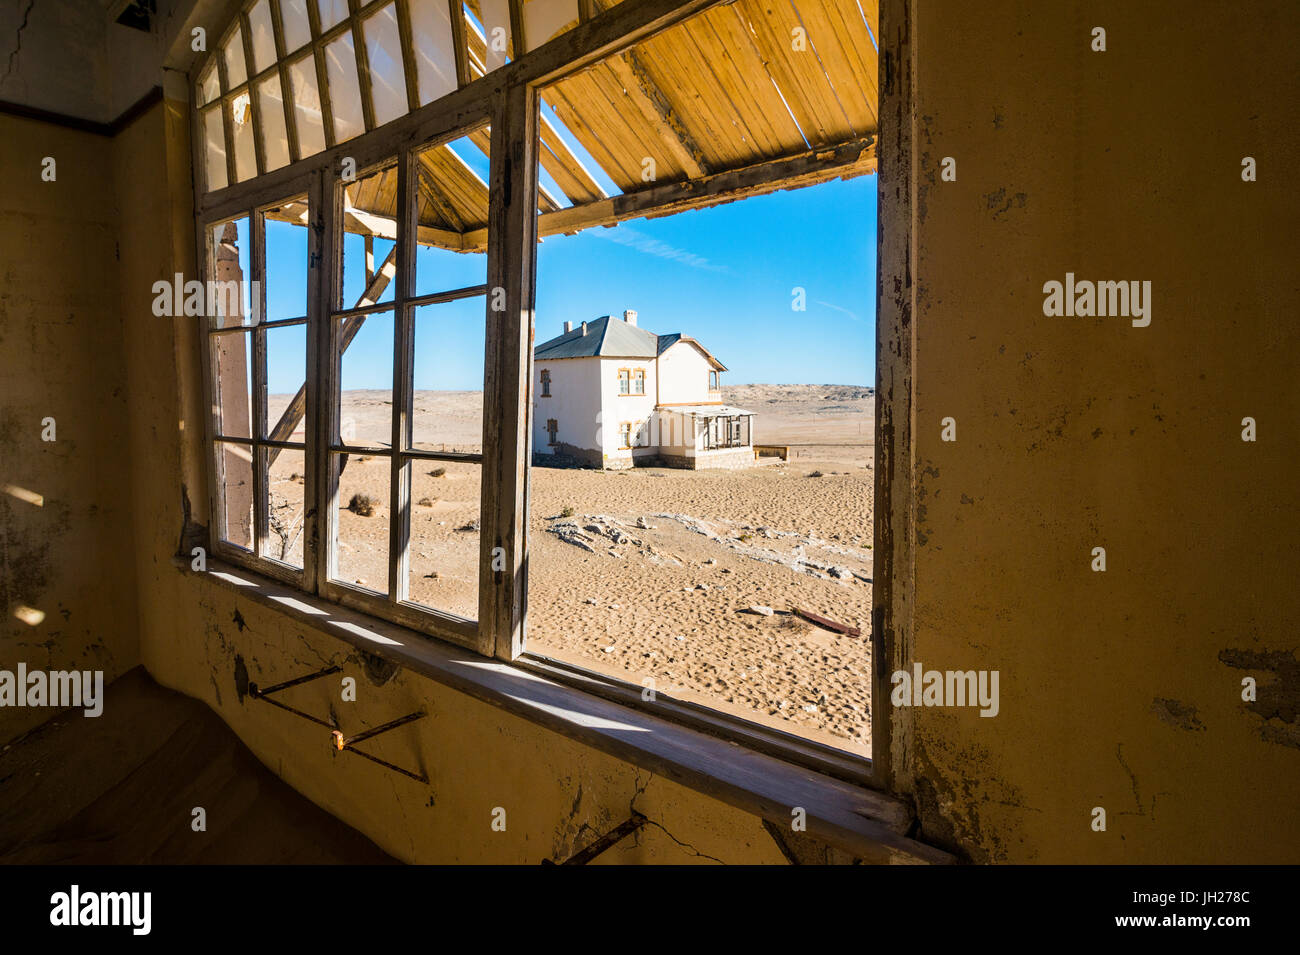 Window of an old colonial house, old diamond ghost town, Kolmanskop (Coleman's Hill), near Luderitz, Namibia, Africa Stock Photo